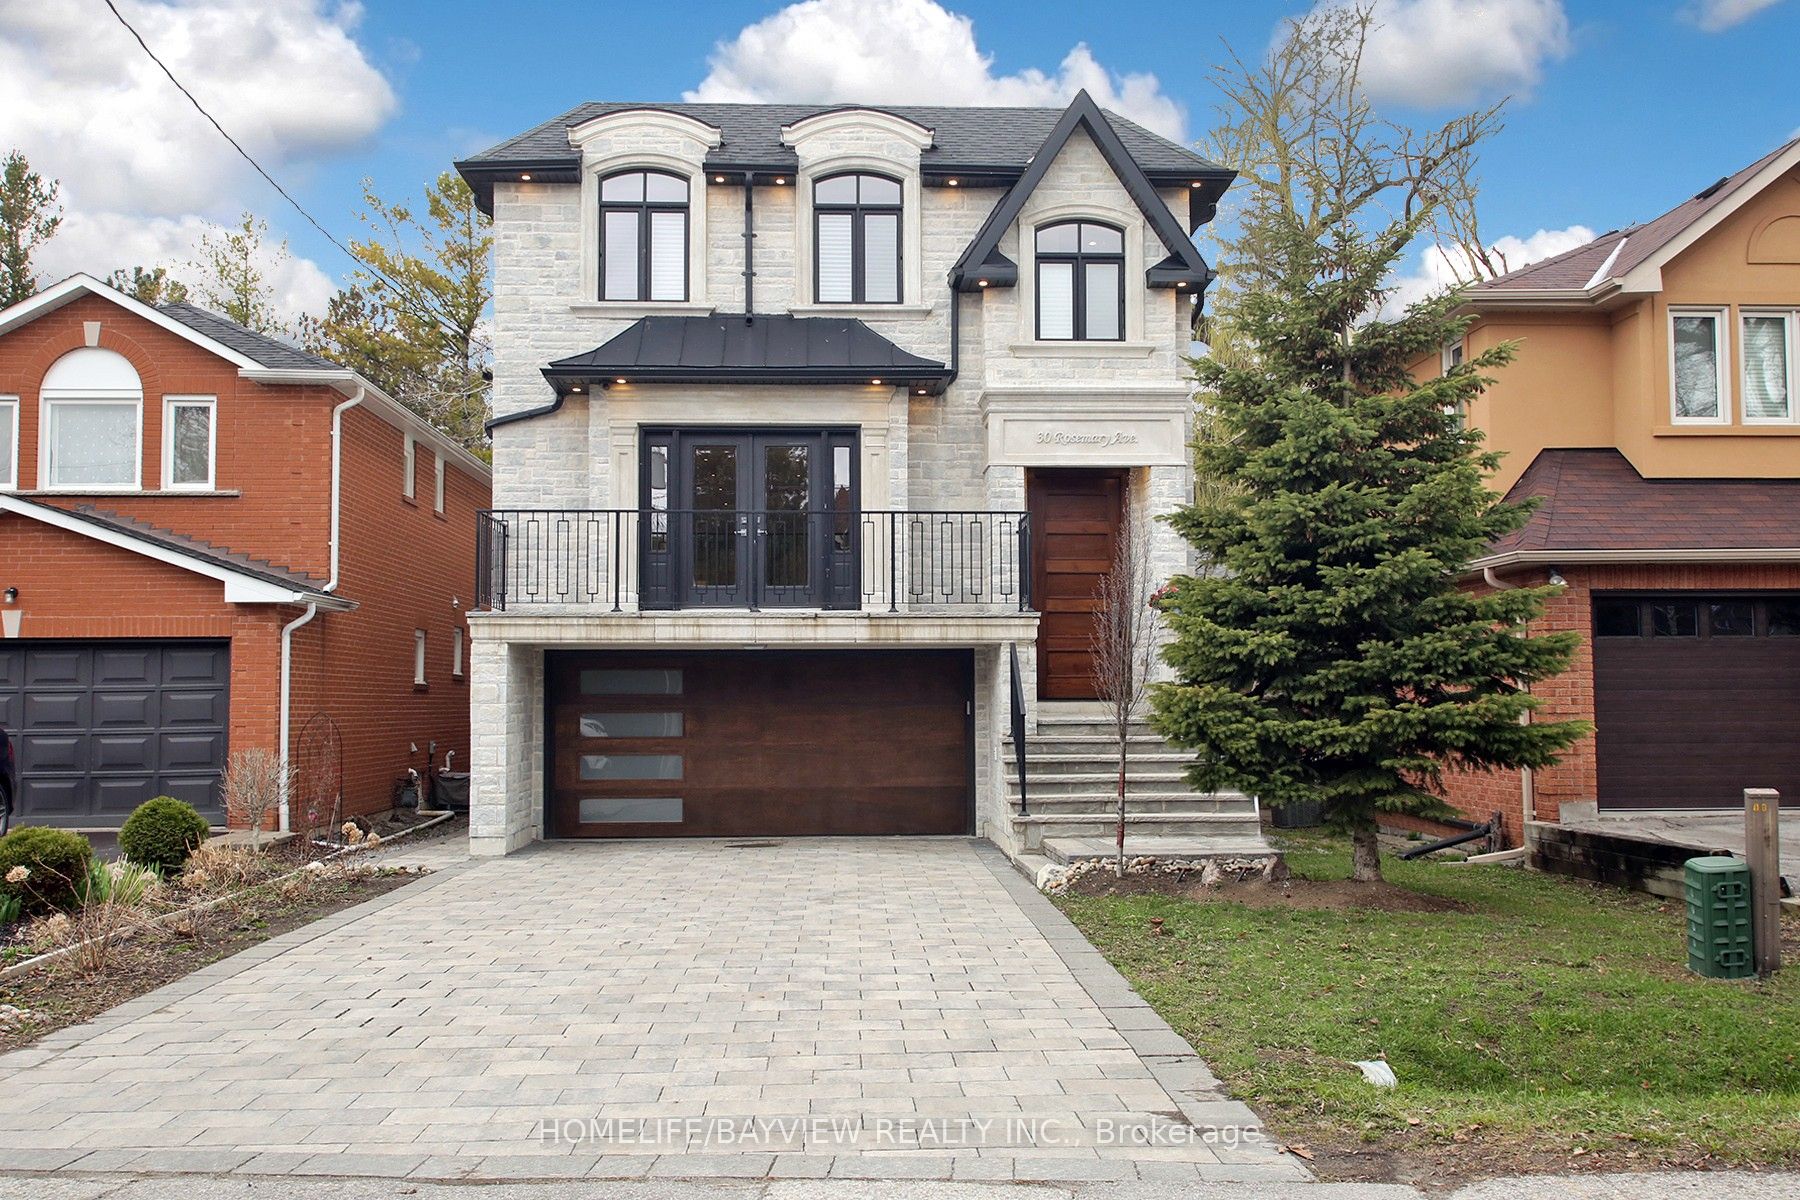 Detached house for sale at 30 Rosemary Ave Richmond Hill Ontario